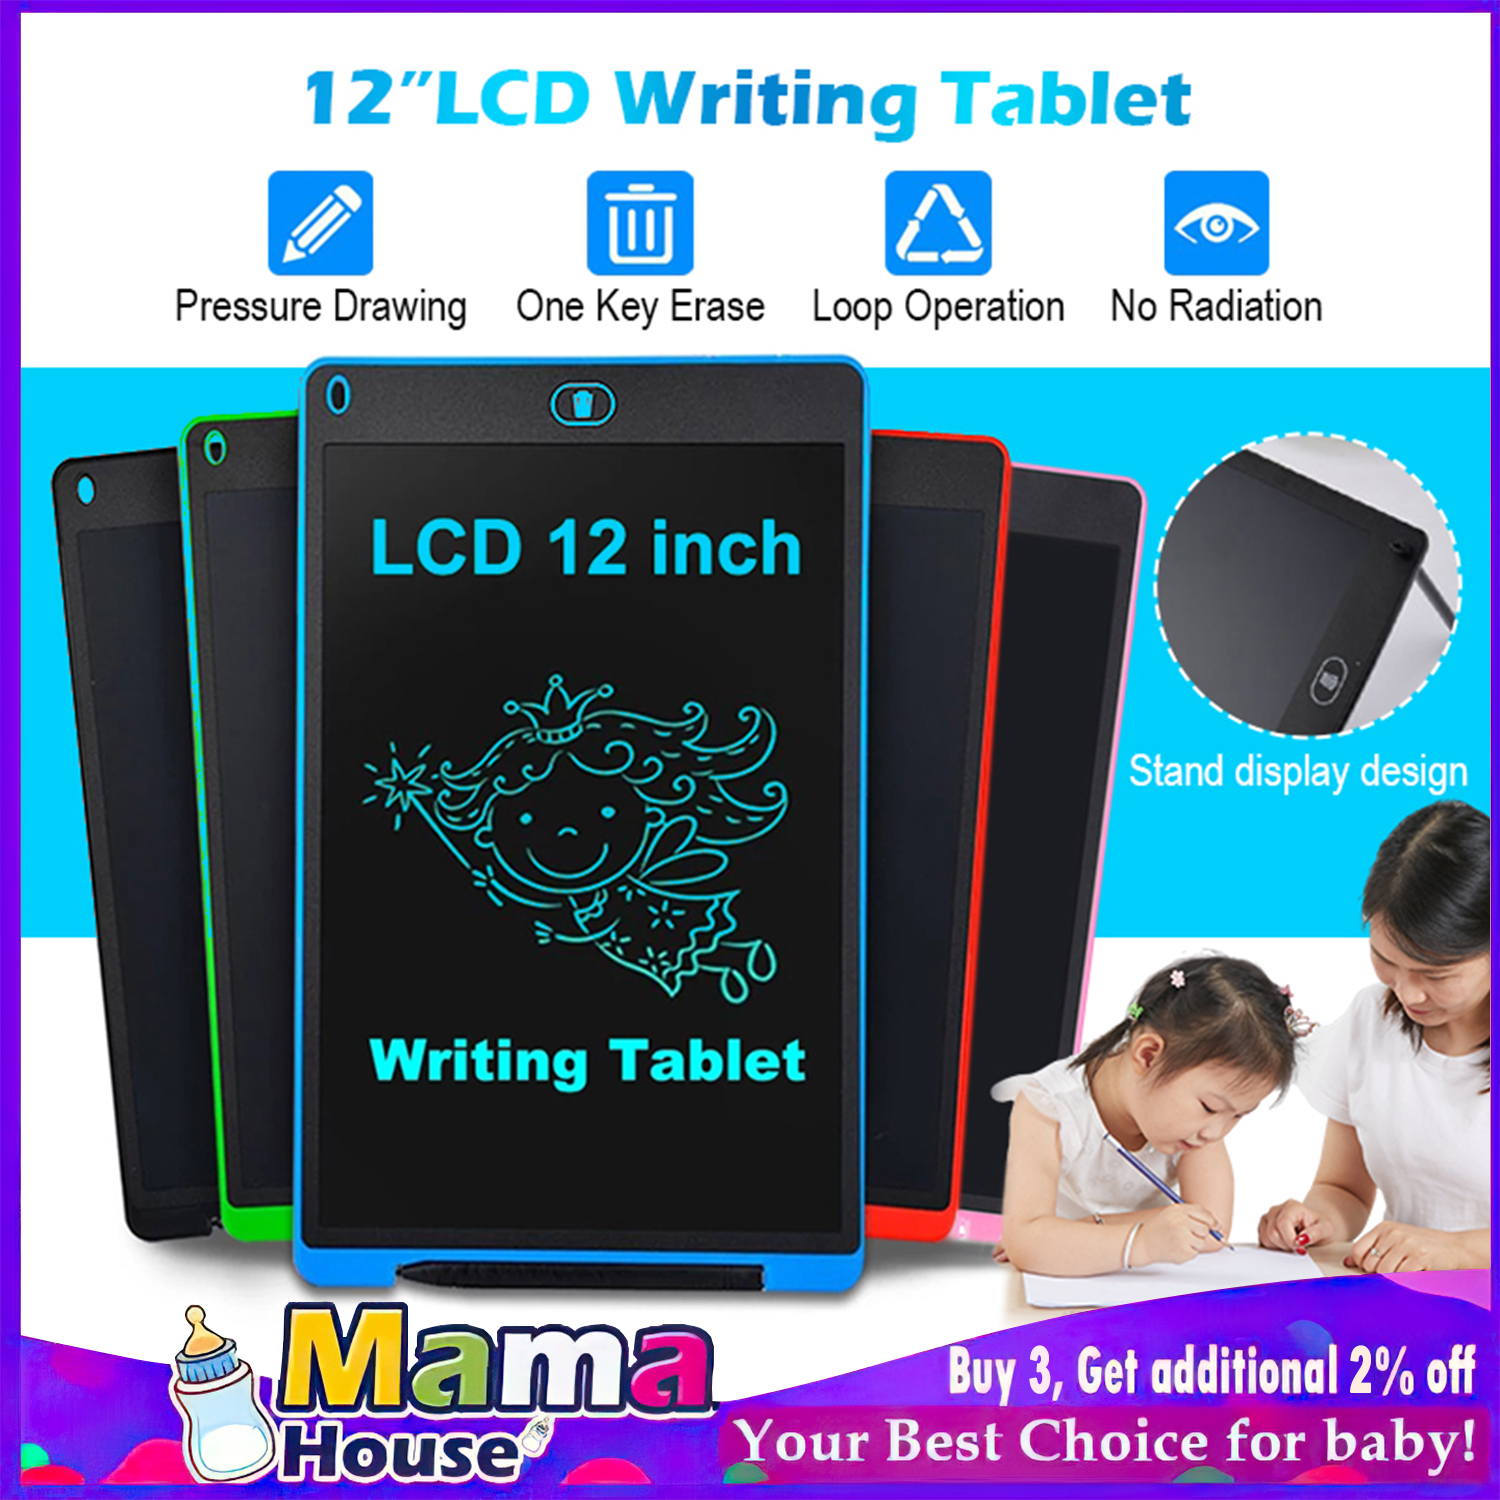 Large LCD Writing Tablet Portable Drawing Board for Kids